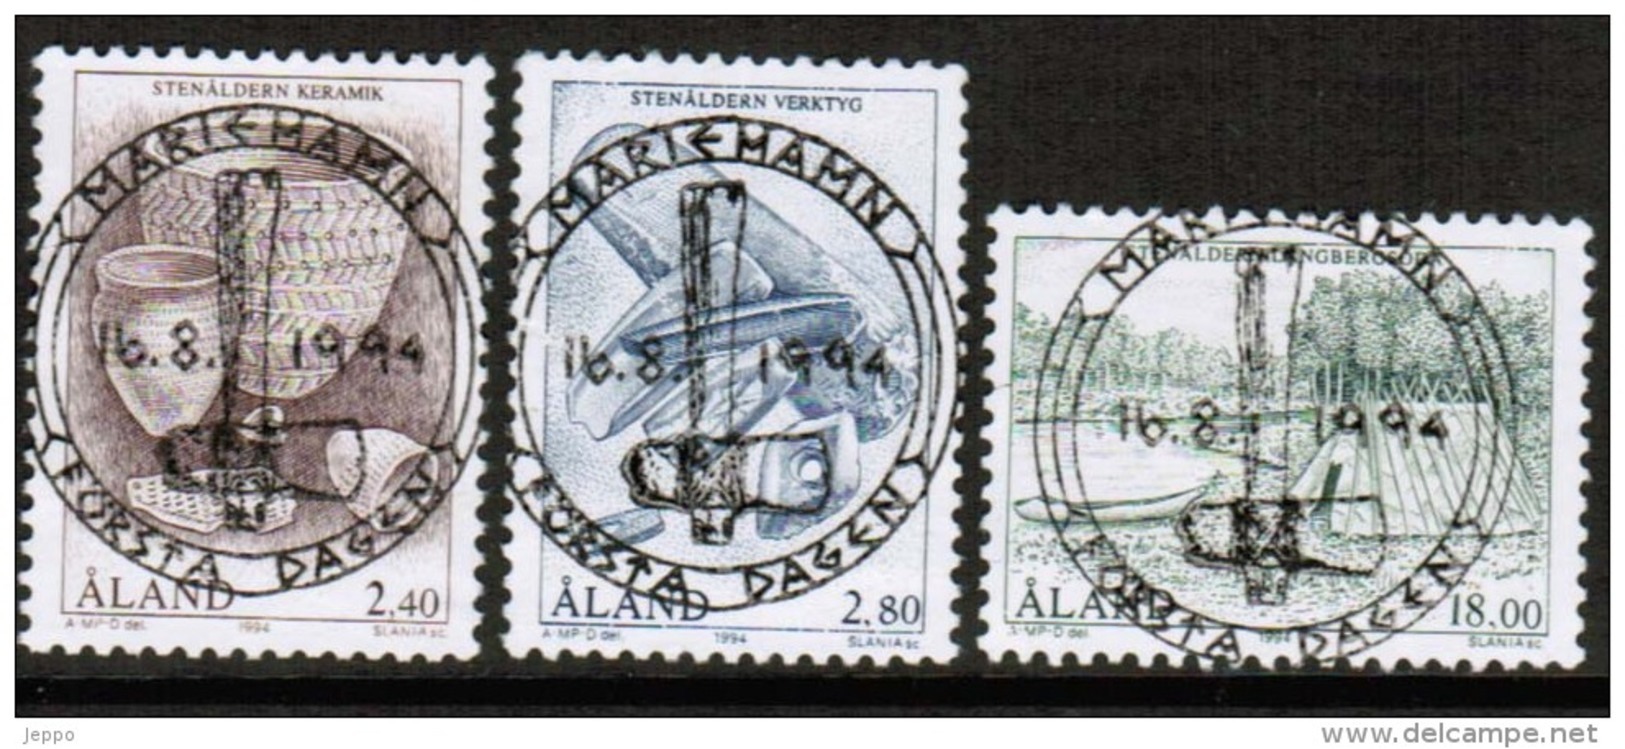 1994 Aland Islands Michel 88-90 With Luxury FD Cancels. - Aland